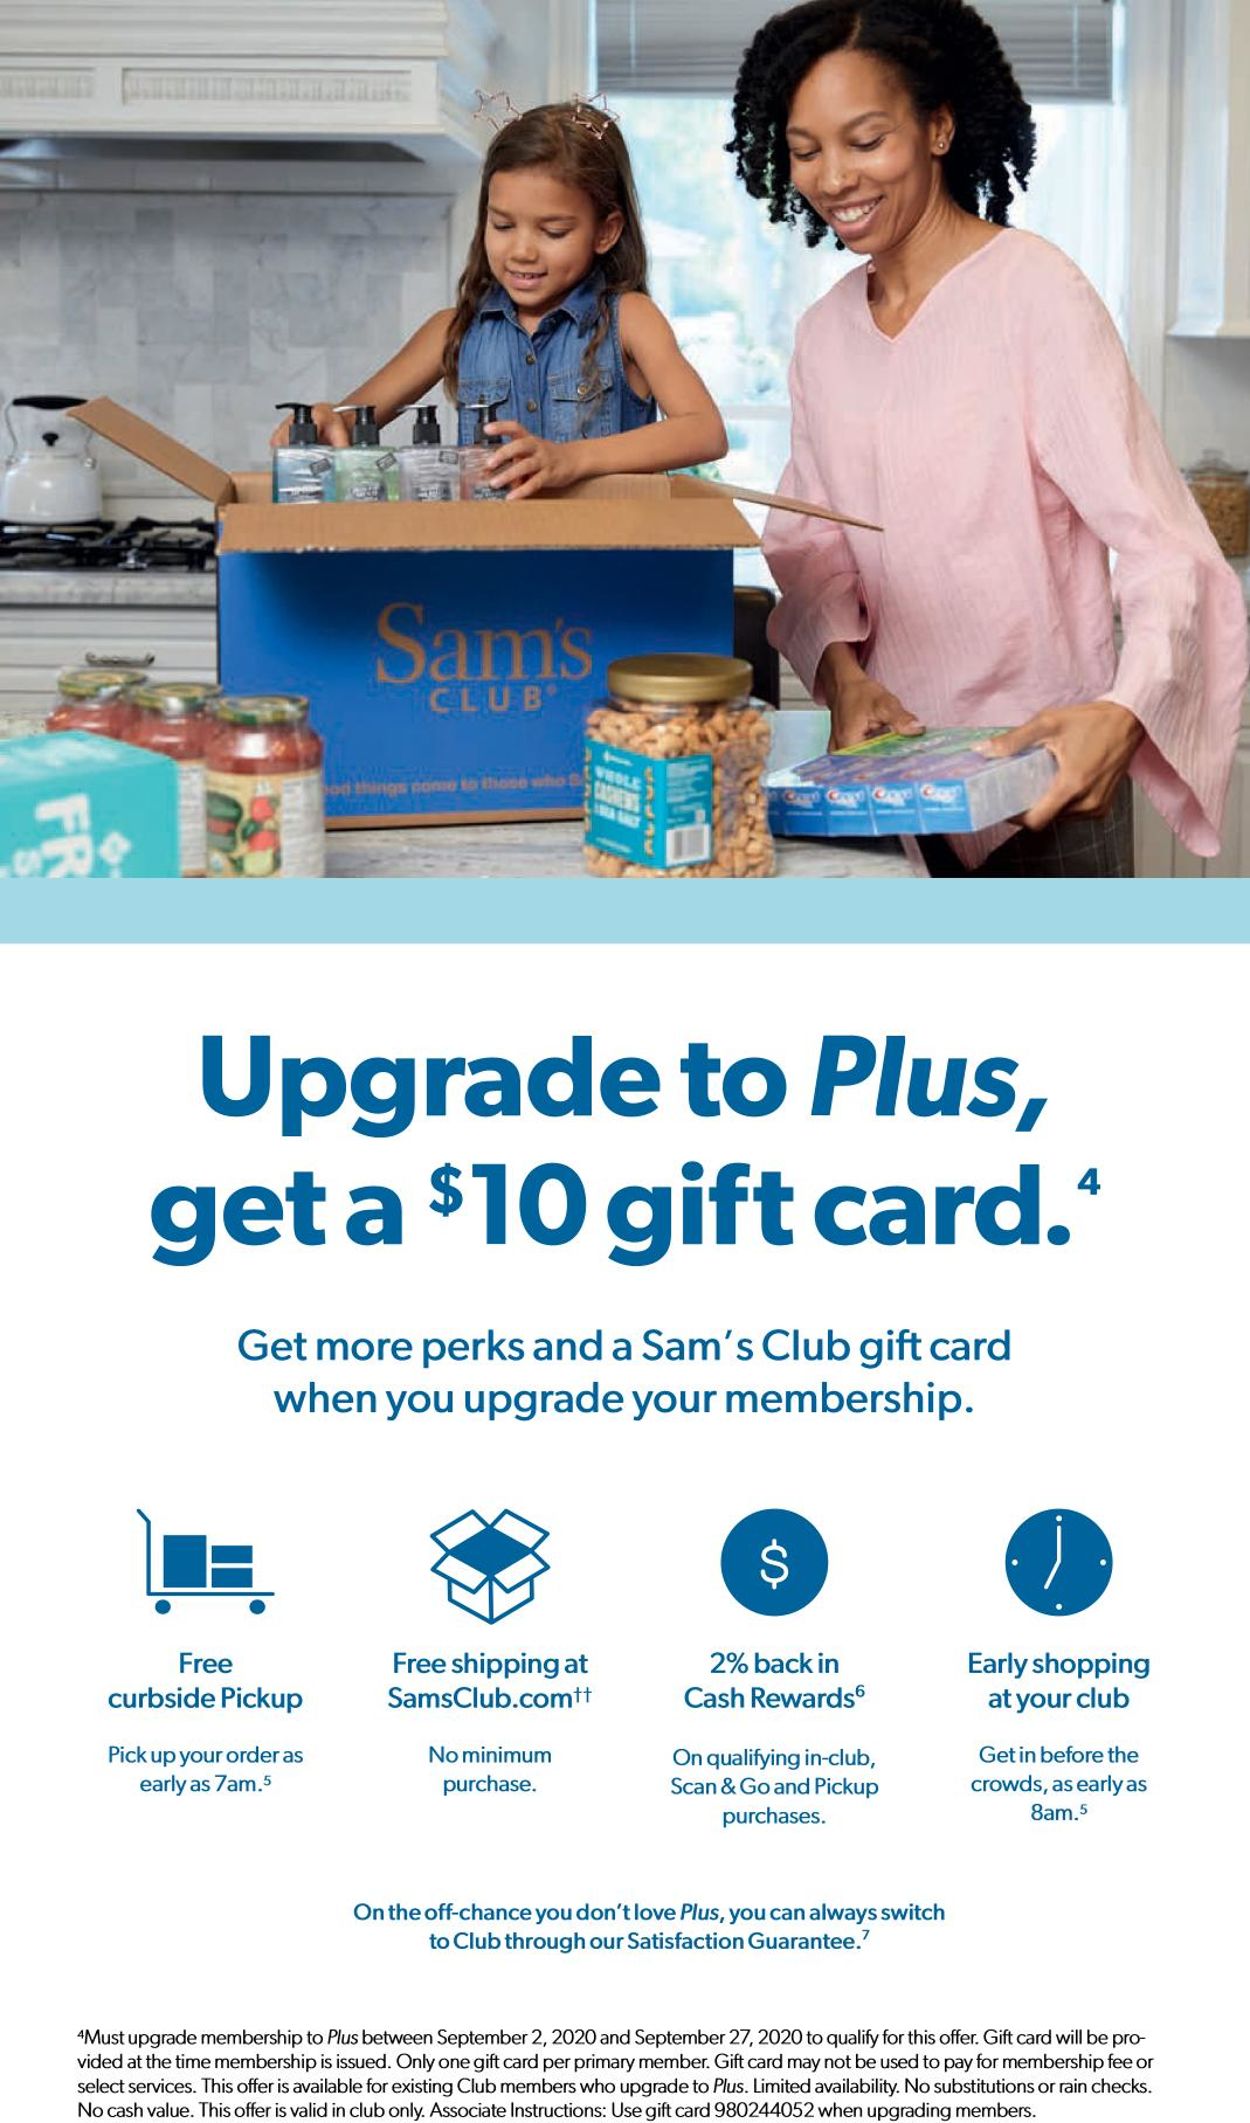 Sam's Club Current weekly ad 09/02 - 09/27/2020 [29] - frequent-ads.com